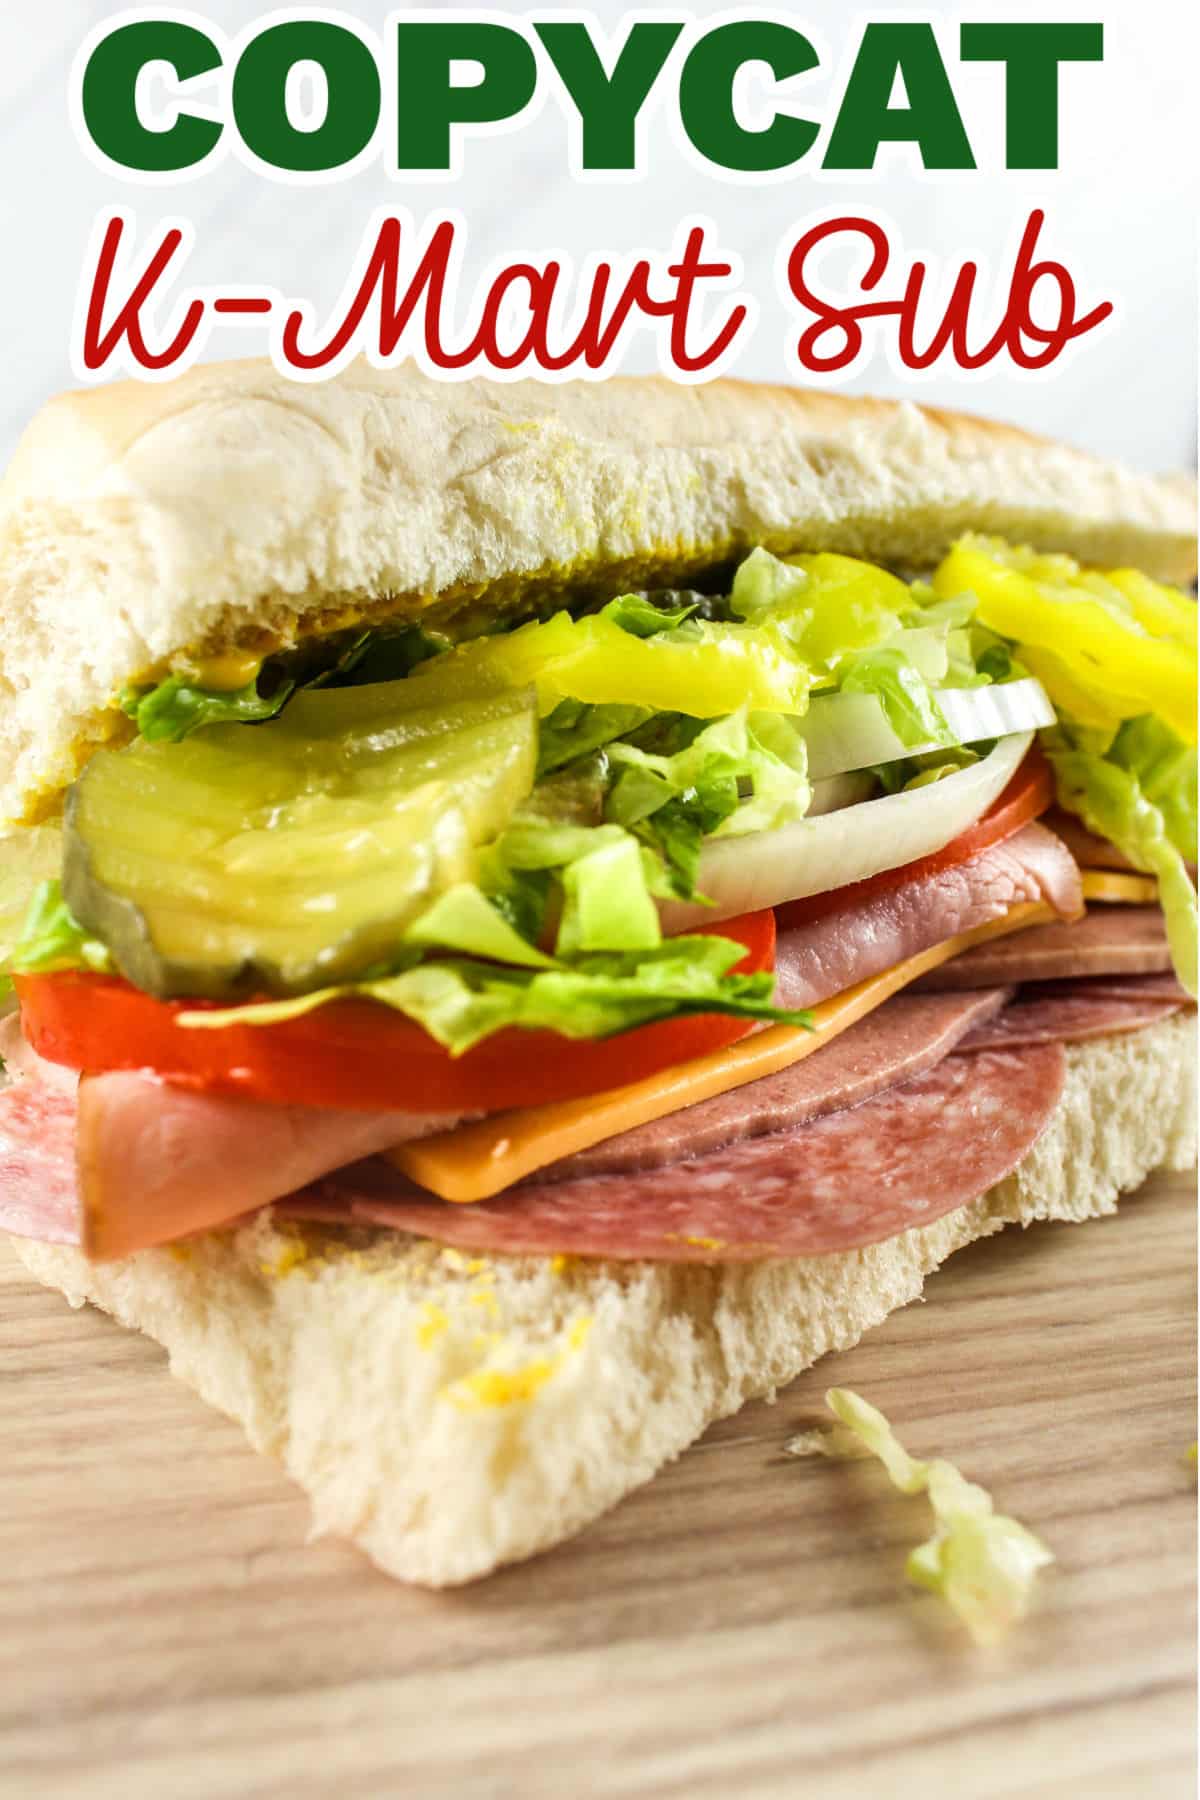 Back in the day, Kmart had restaurants in the back and this Kmart sub recipe takes me back!!! My Grandpa would always indulge me with their wonderful sub sandwich. Every bite was a taste of my past! Plus - it's loaded with 3 meats, cheese and tons of veggies! via @foodhussy